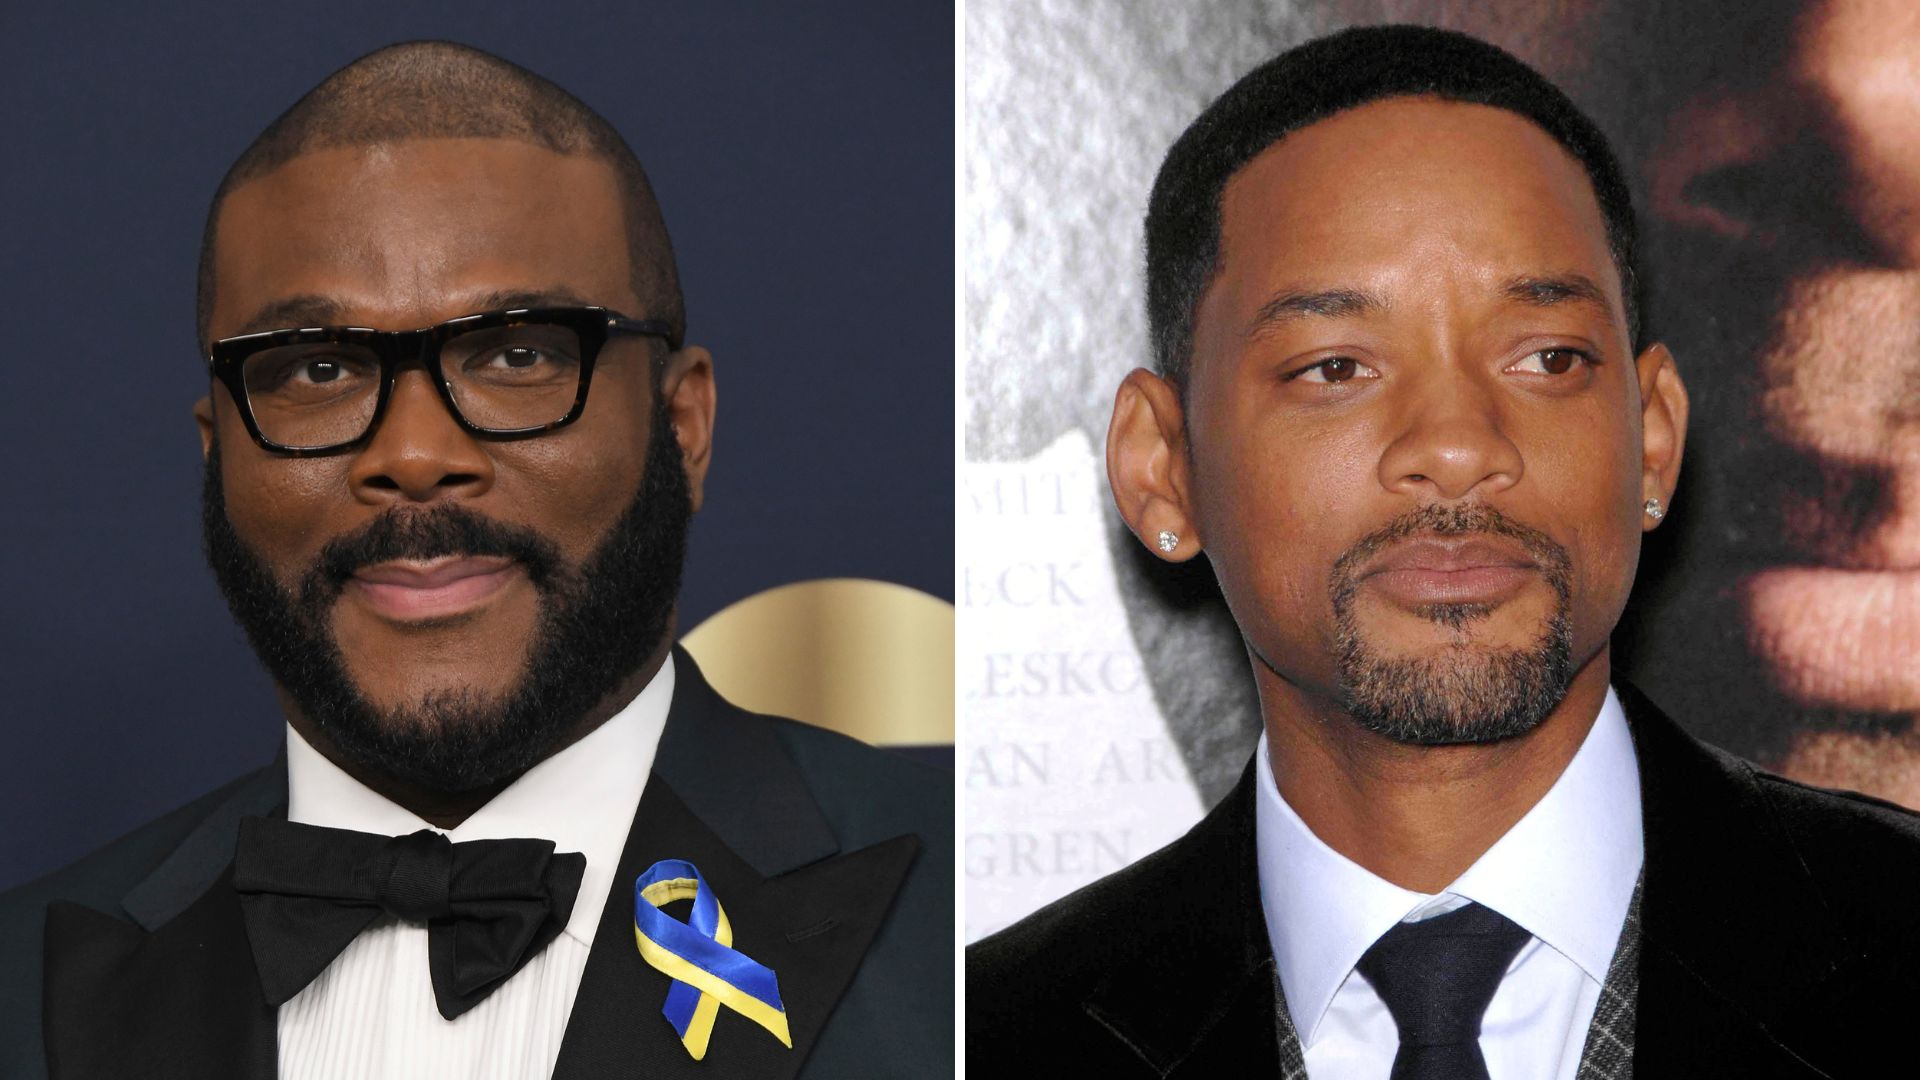 will Smith Was Devastated After Oscars Slap Says Tyler Perry Indiewire